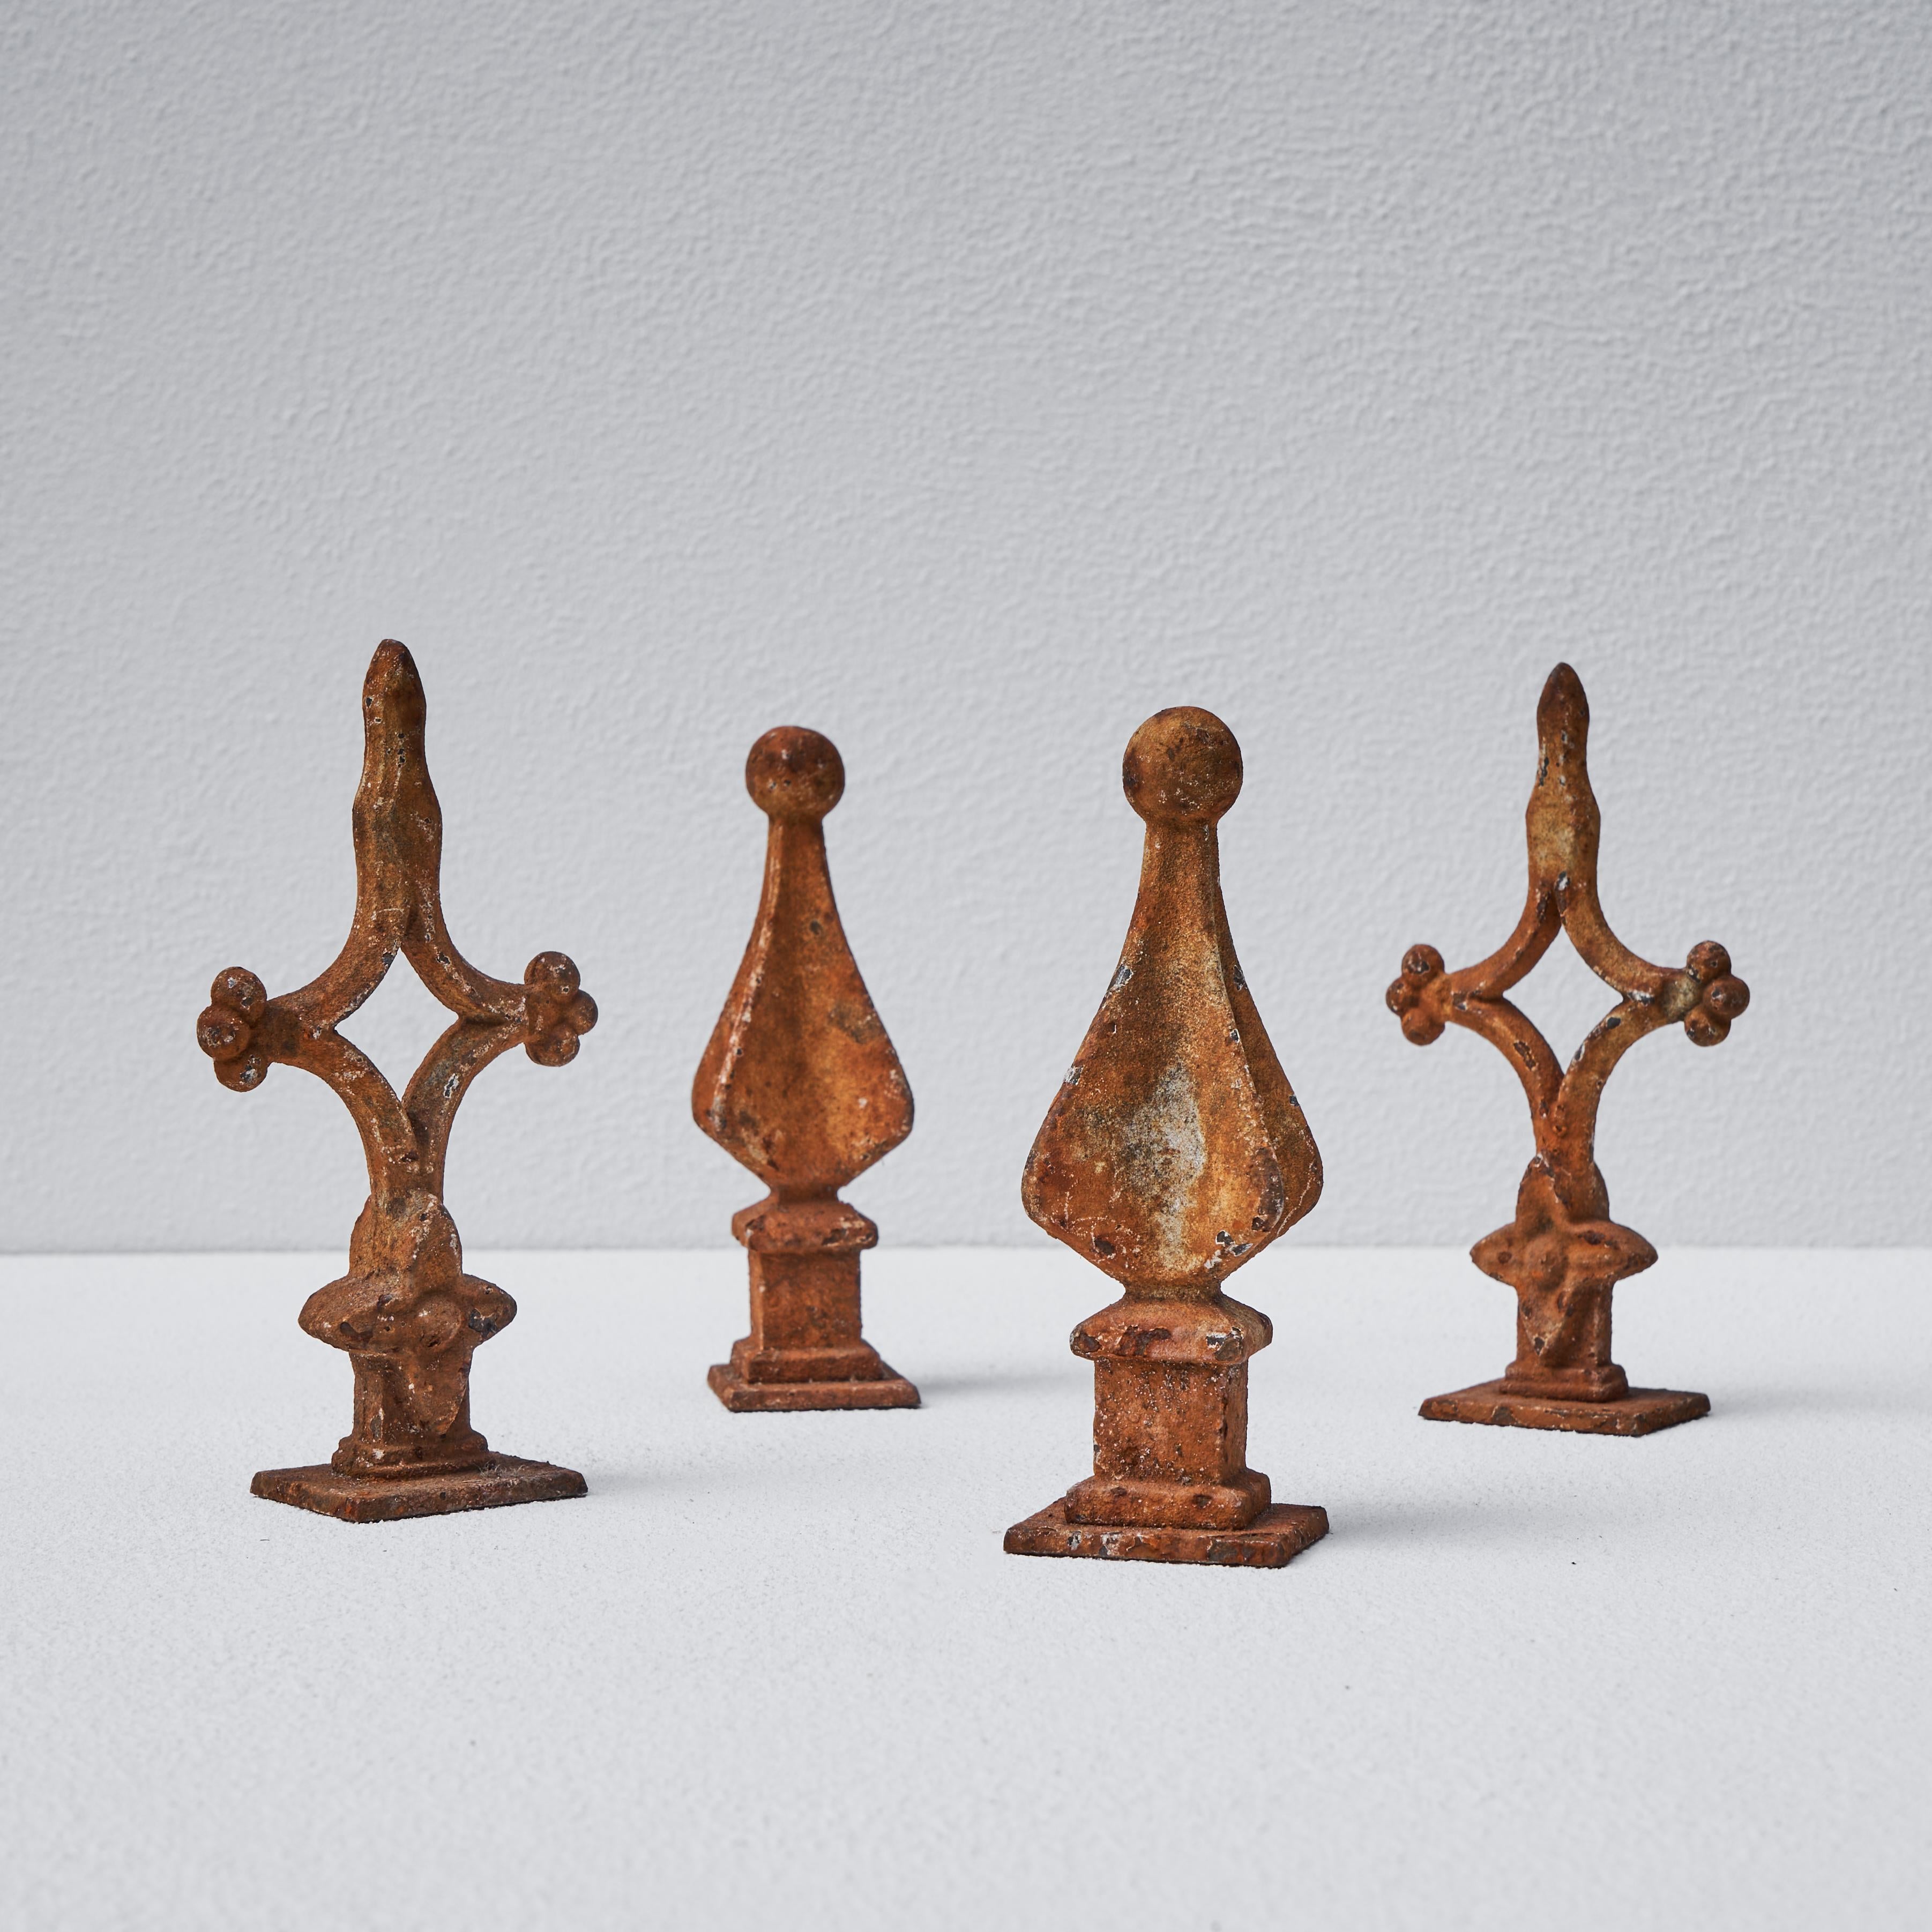 Pair of Rusted 19th Century Decorative Finials For Sale 3